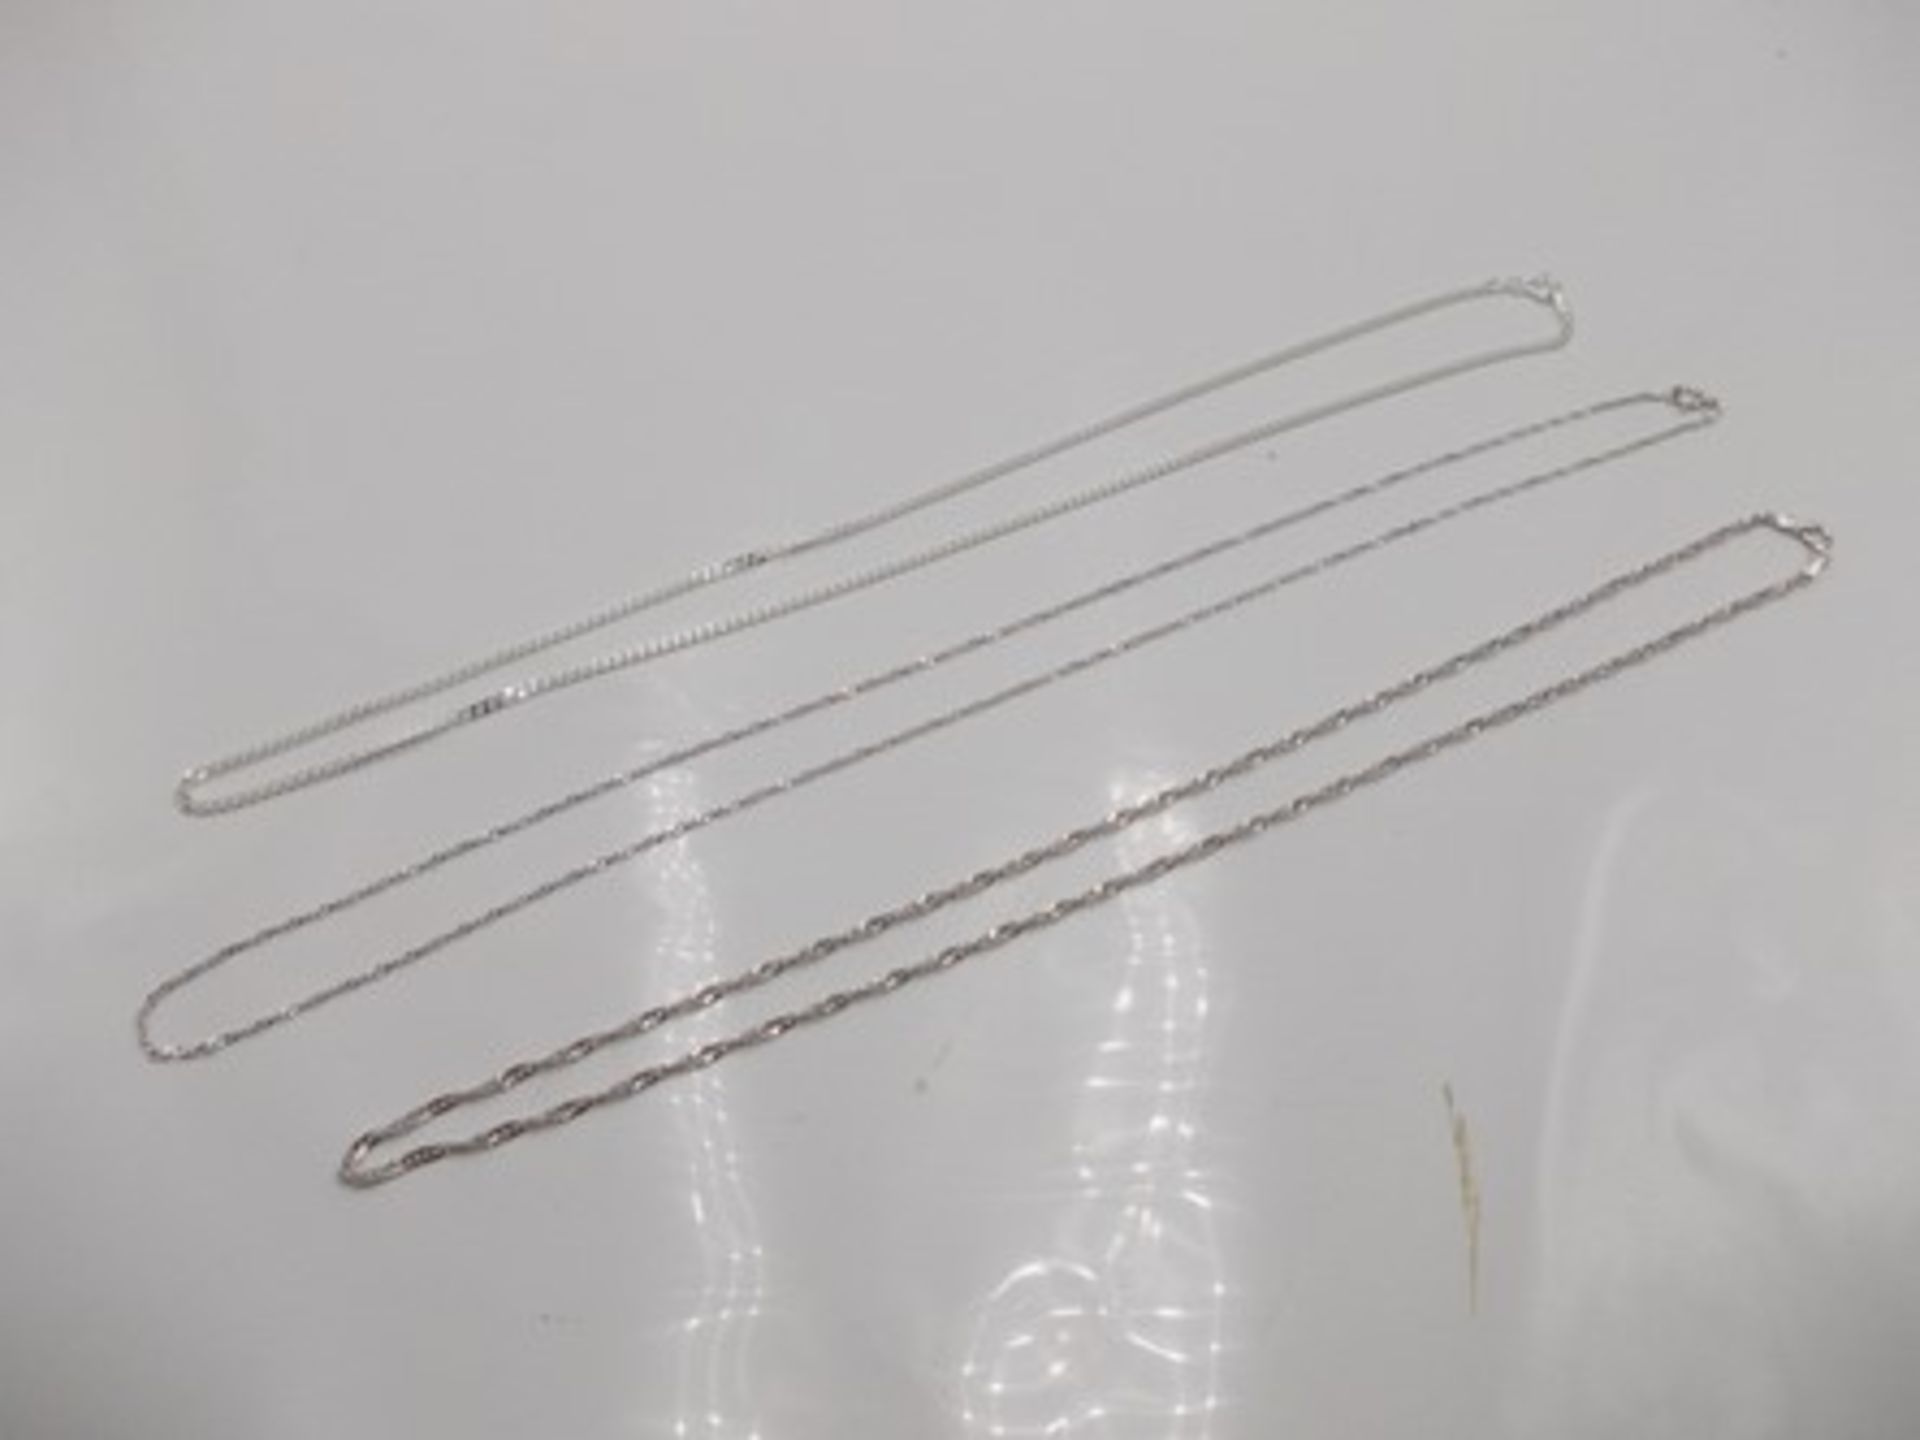 45 x silver necklaces comprising 20 x 18" curb necklaces, 15 x 20" Singapore necklaces and 10 x